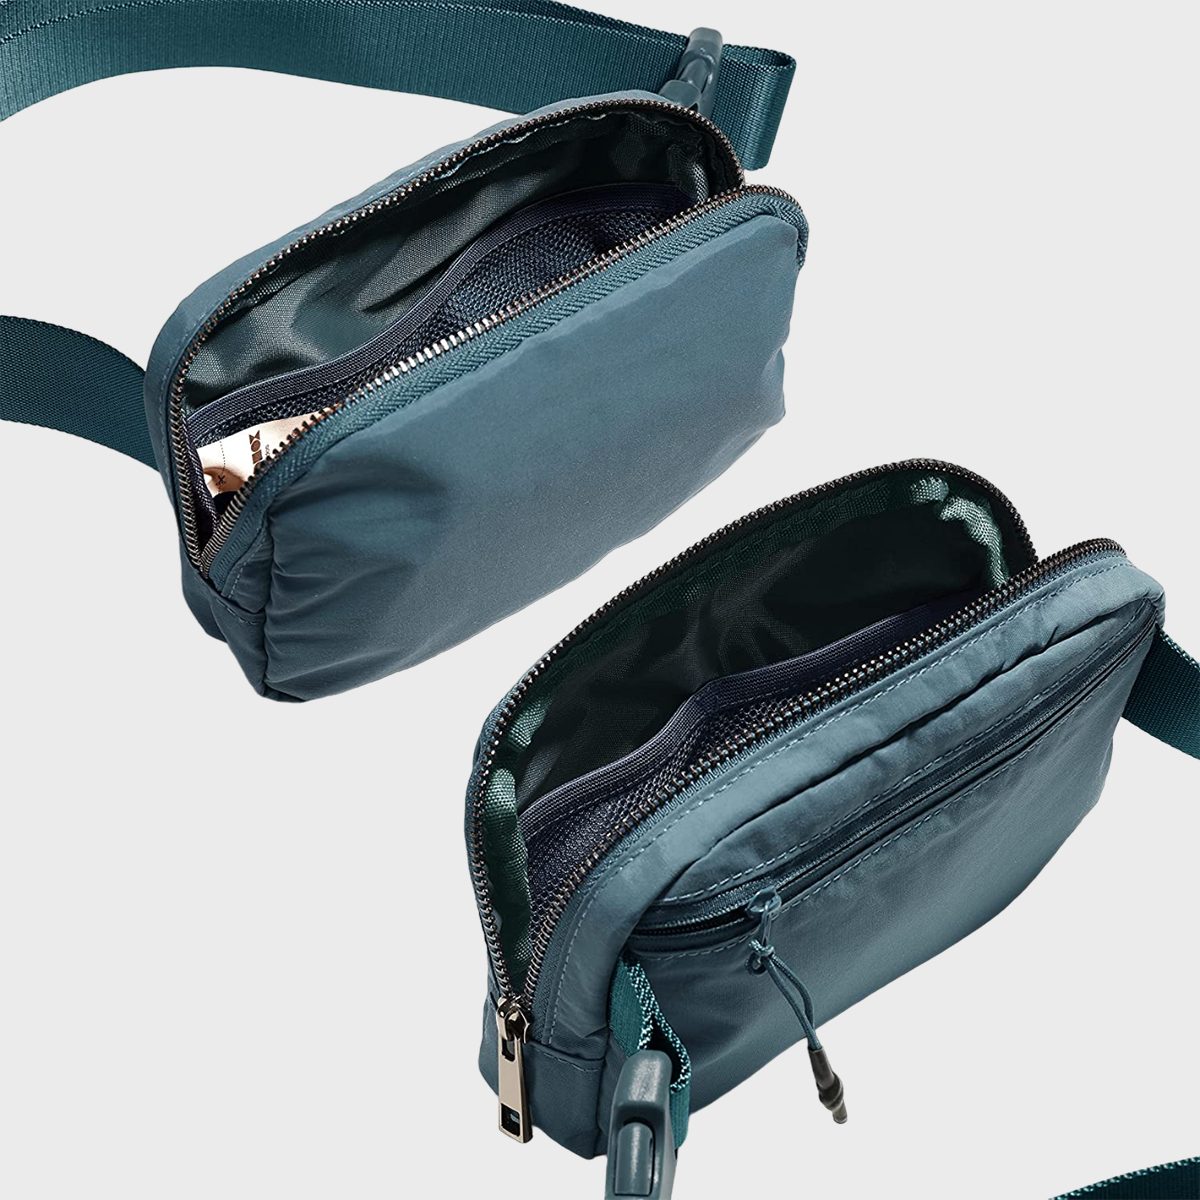 This  Belt Bag is an Affordably Stylish Accessory